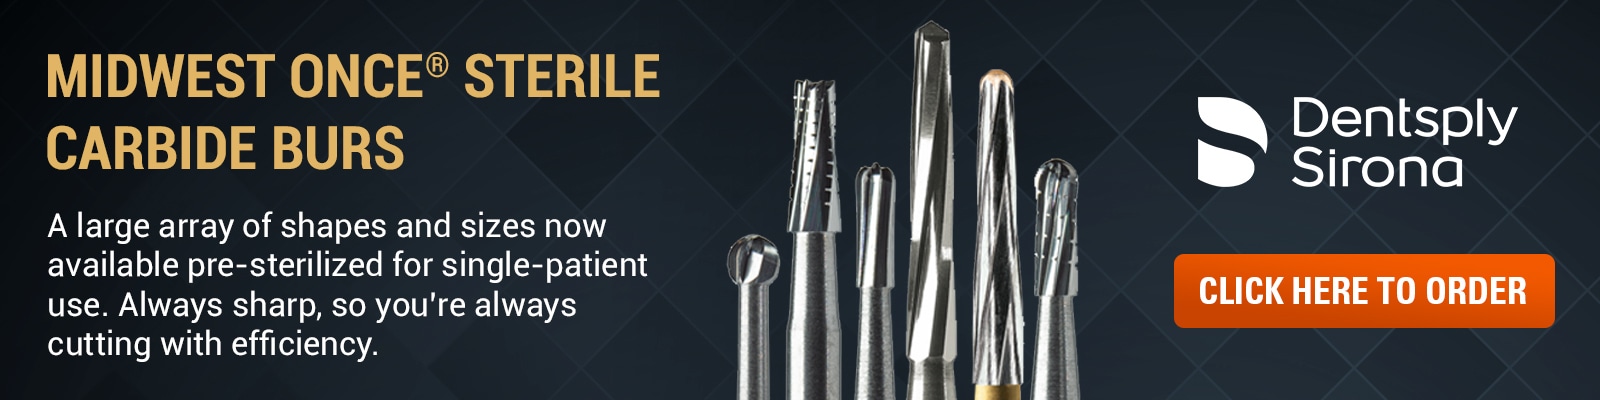 Midwest Once® Sterile Carbide Burs – Dentsply Sirona